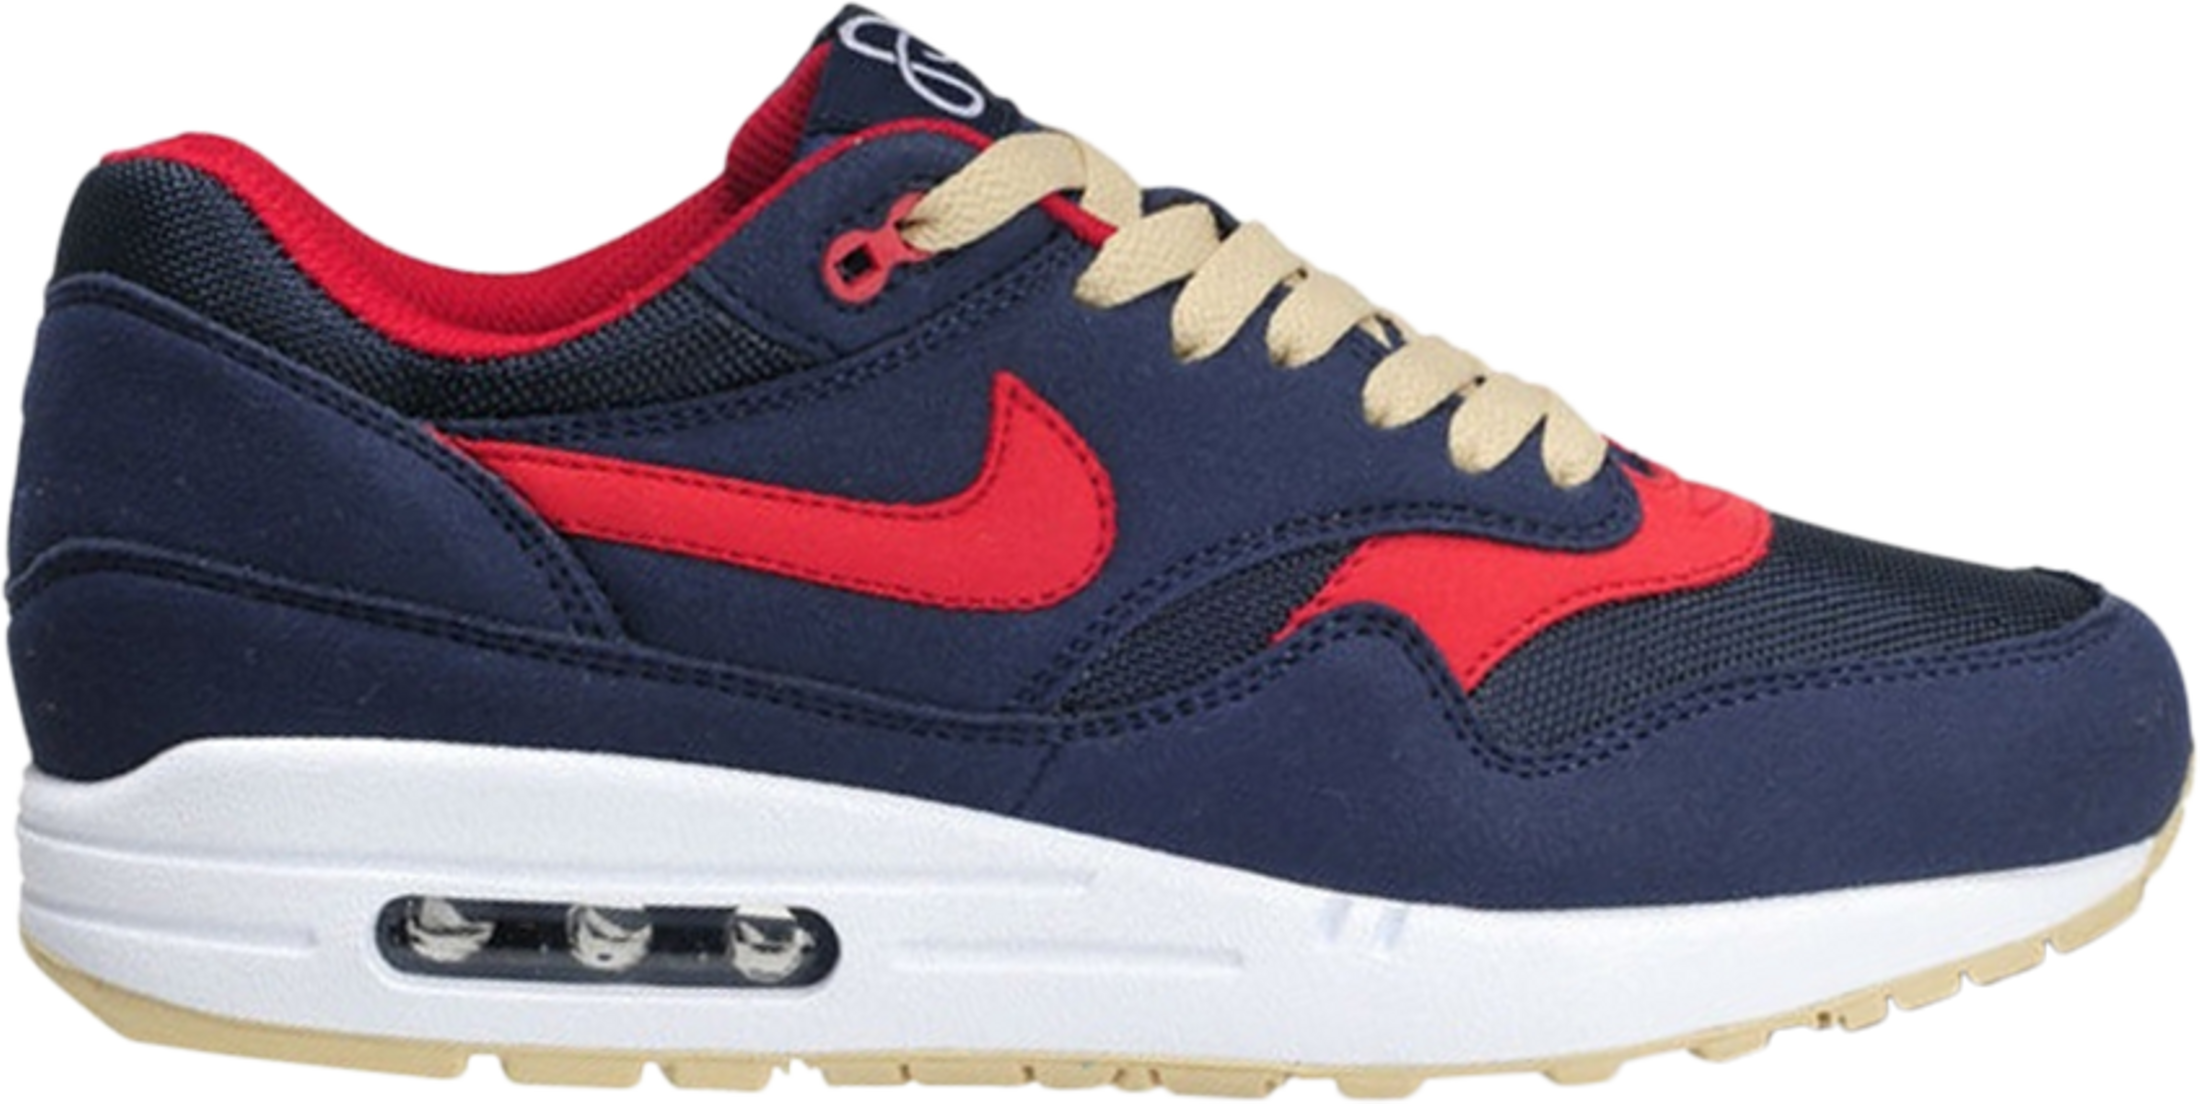 Picasso Indringing Mooie vrouw Air Max 1 'Omega Pack - Obsidian Sport Red' - 308866 402 – Urban Necessities